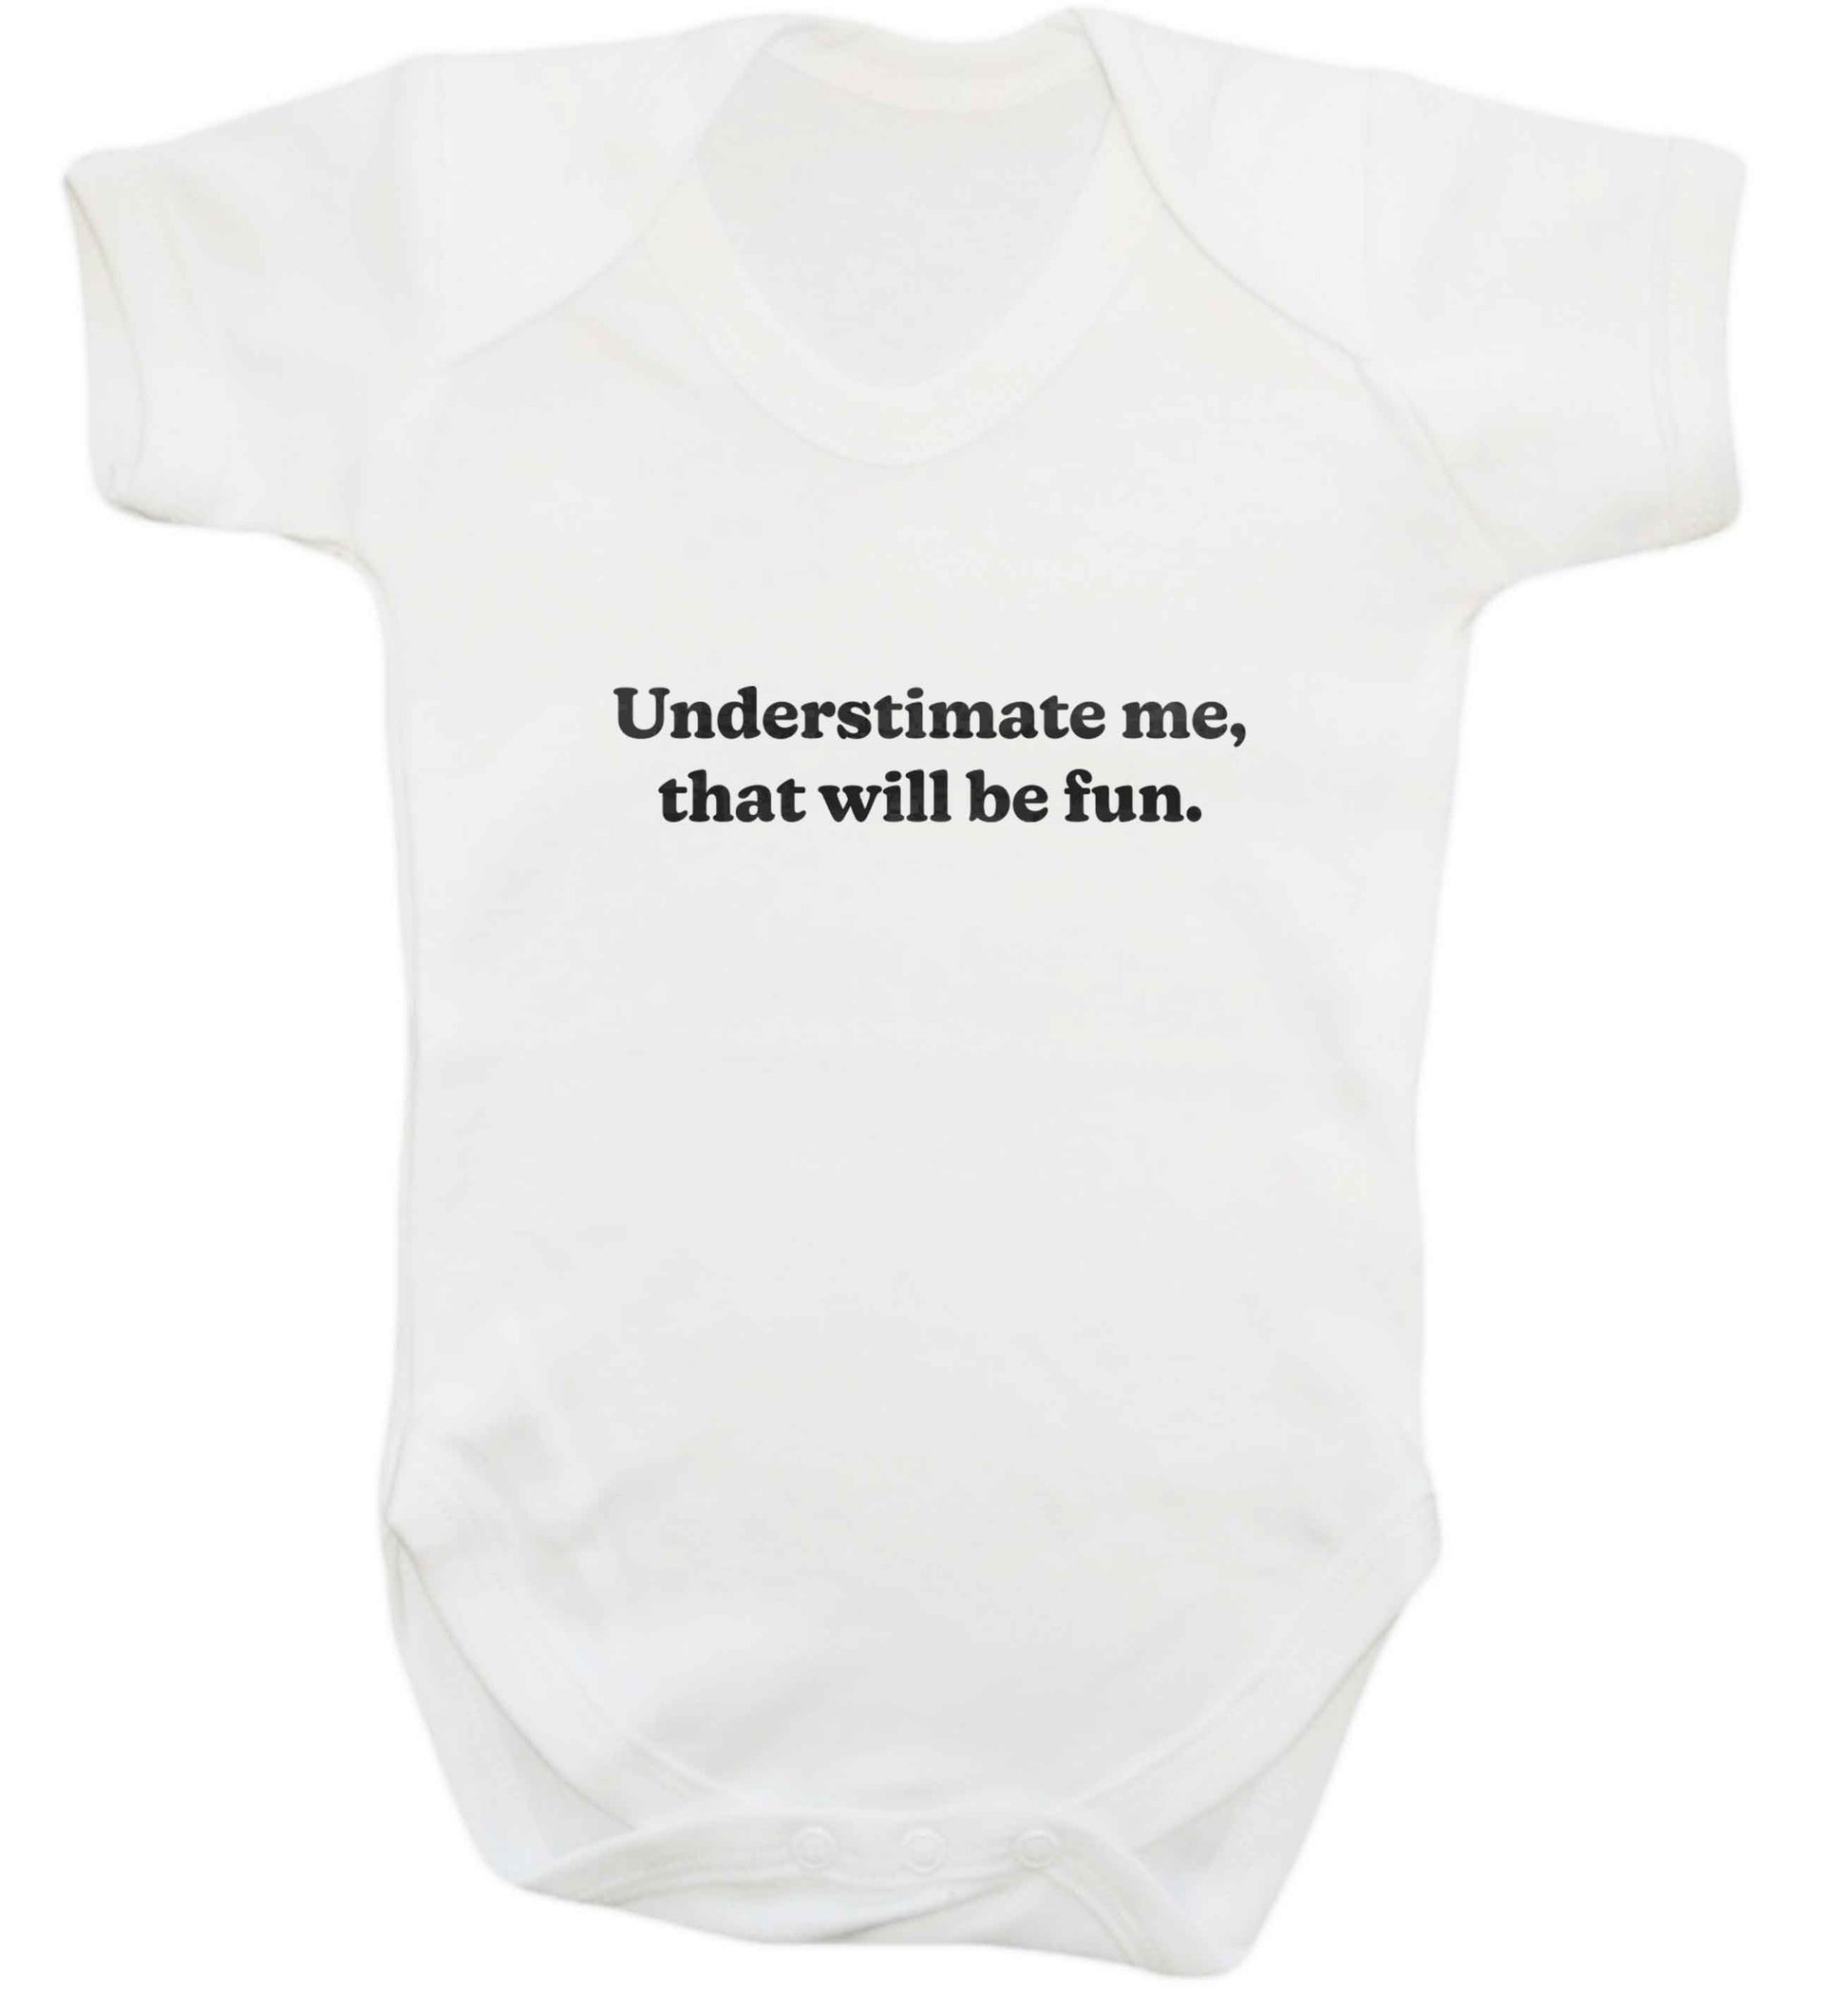 Underestimate me that will be fun baby vest white 18-24 months